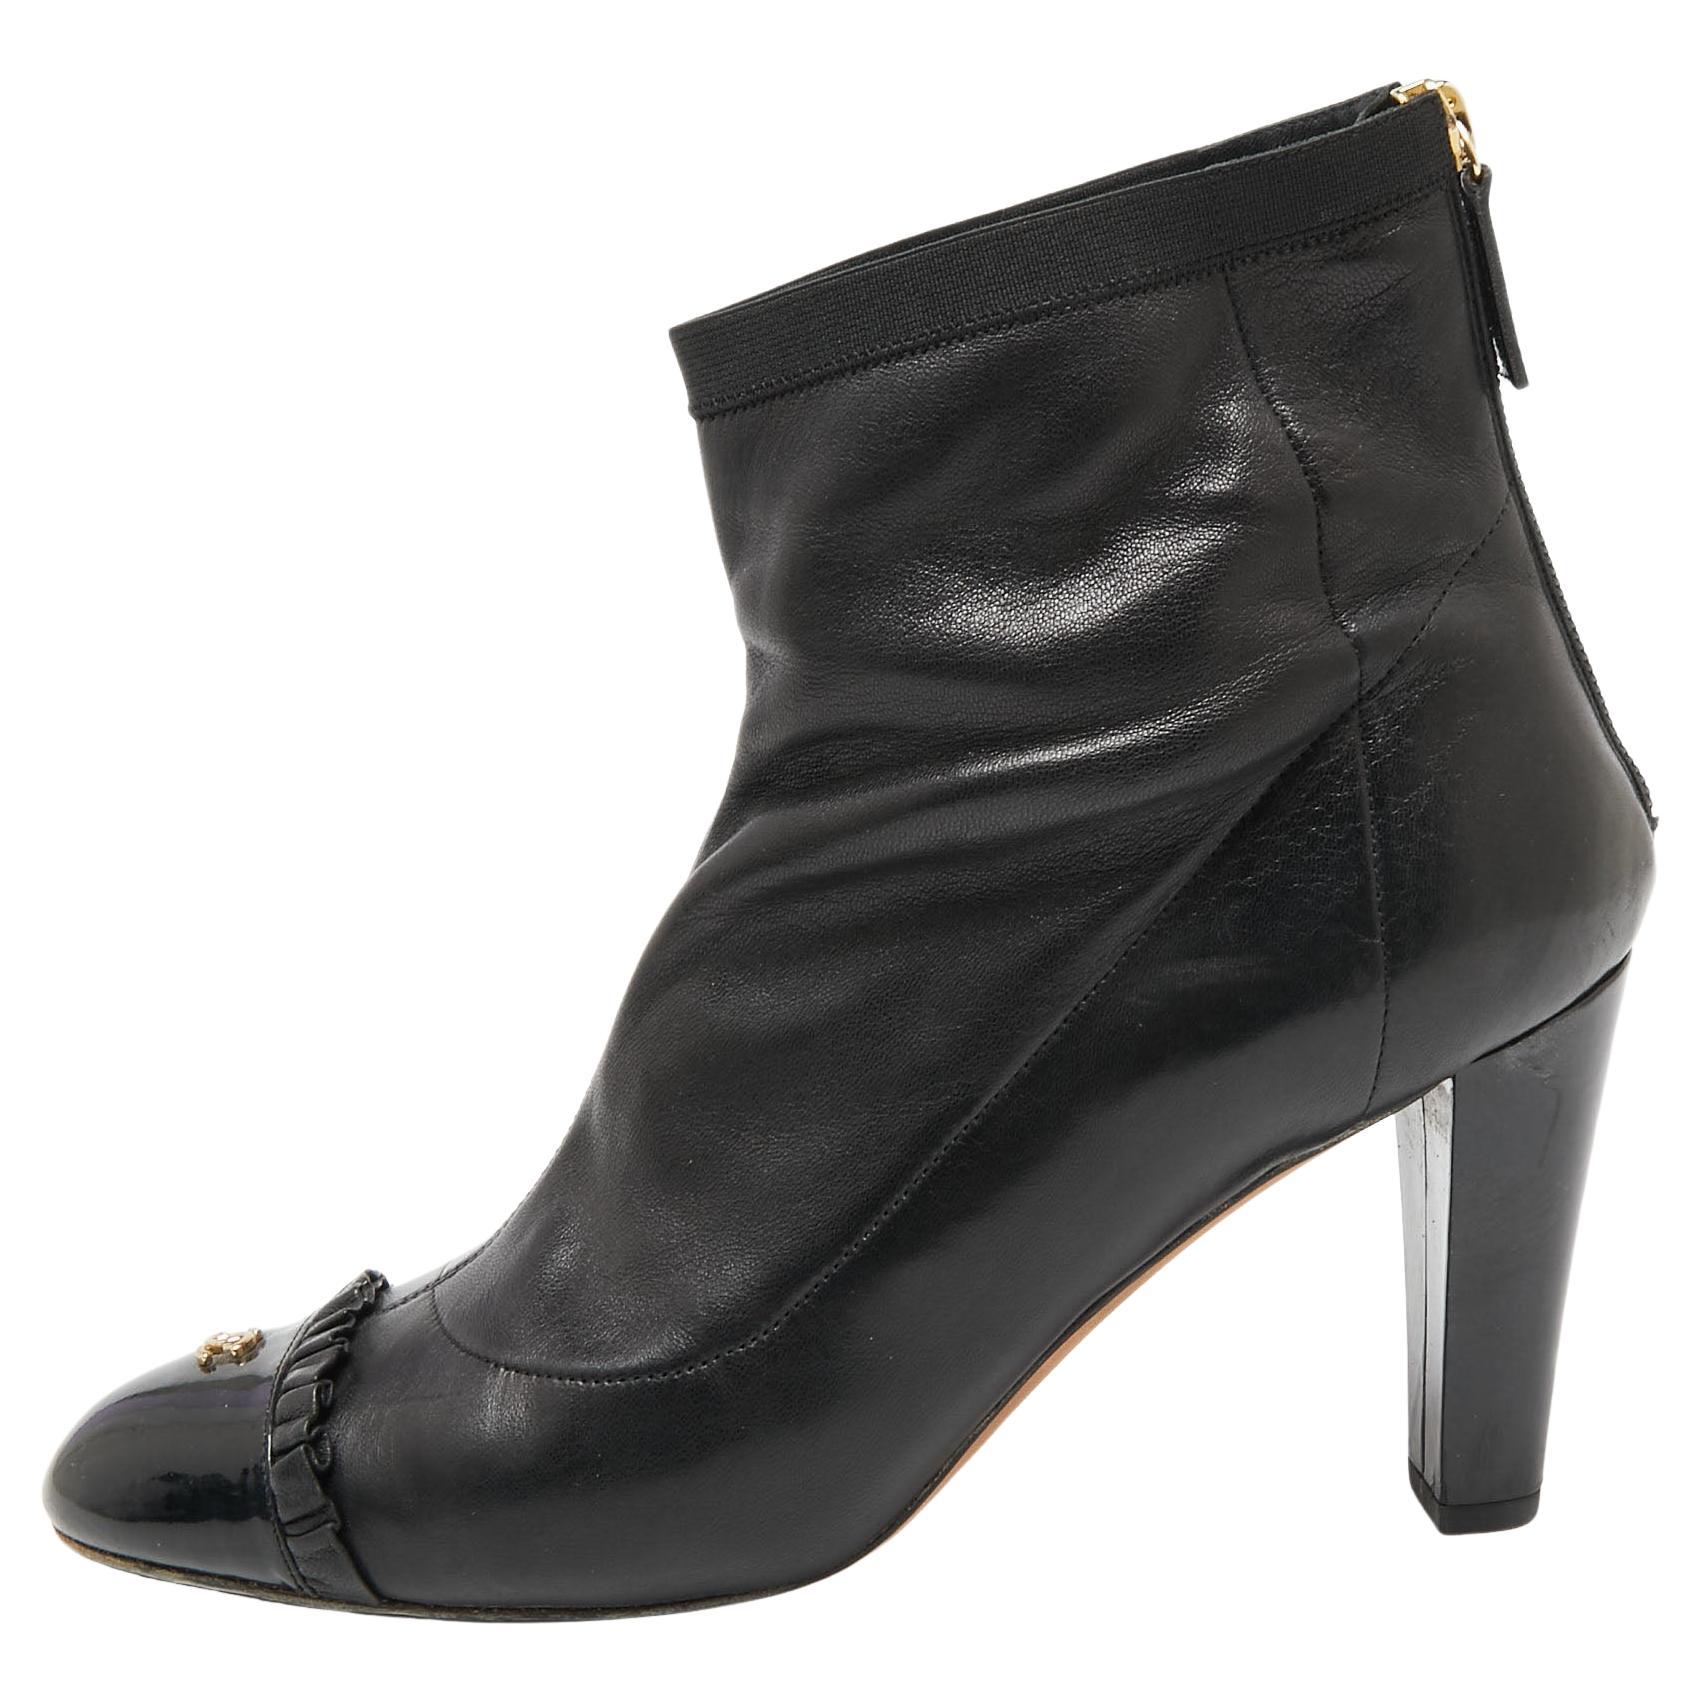 Chanel Black Leather Cap Toe Ankle Boots Size 40